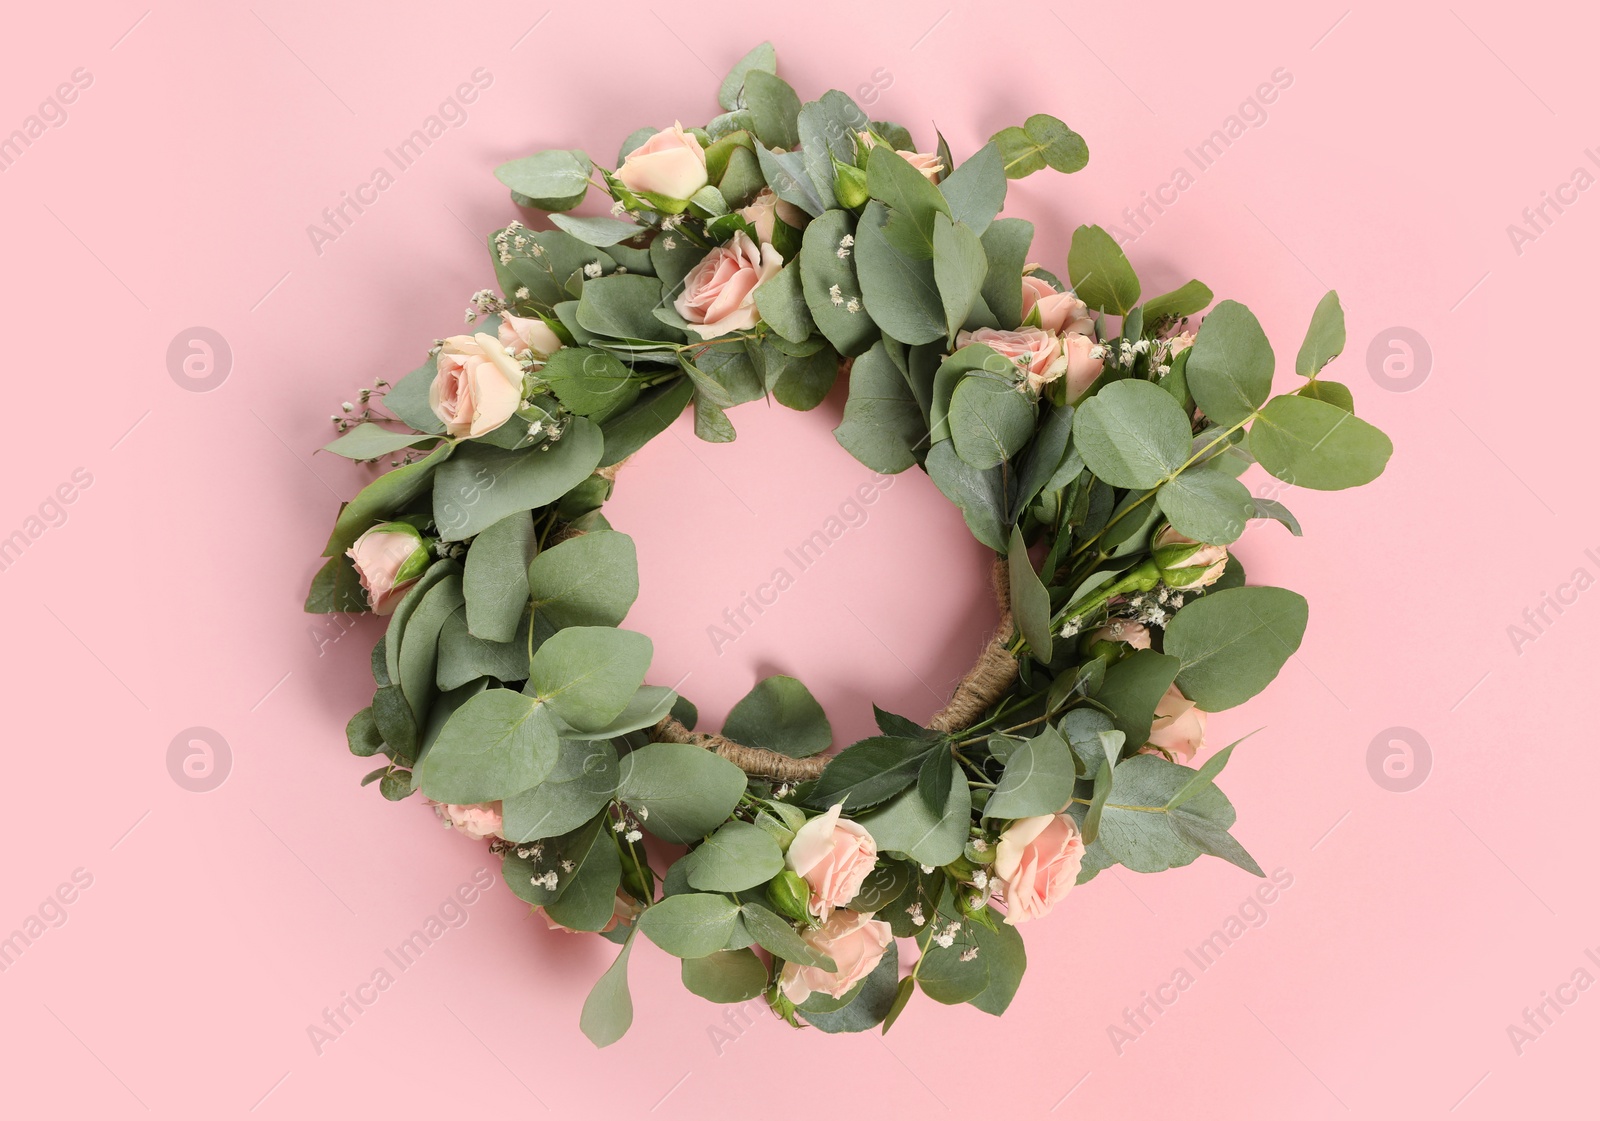 Photo of Wreath made of beautiful flowers on pink background, top view